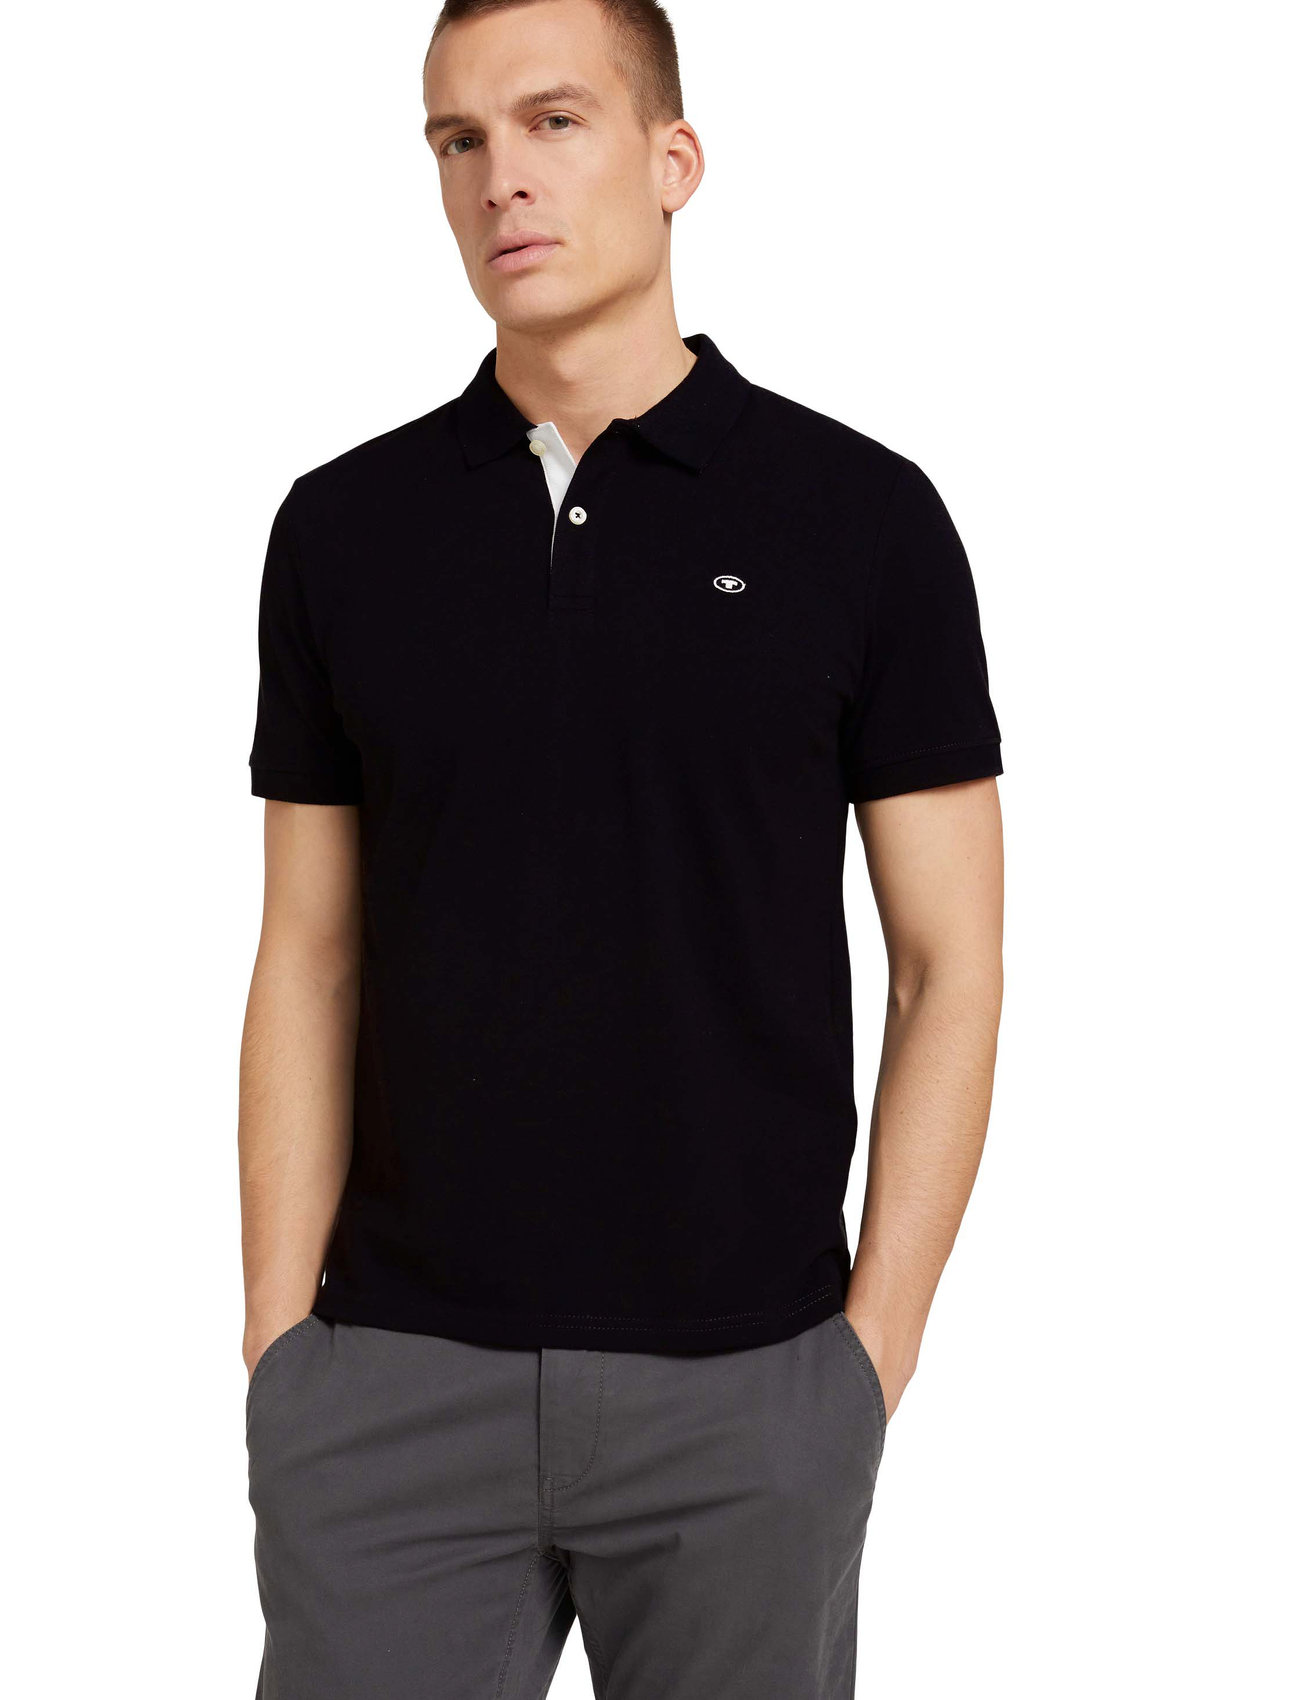 Tom Tailor - basic polo with contrast - short-sleeved polos - black - 0